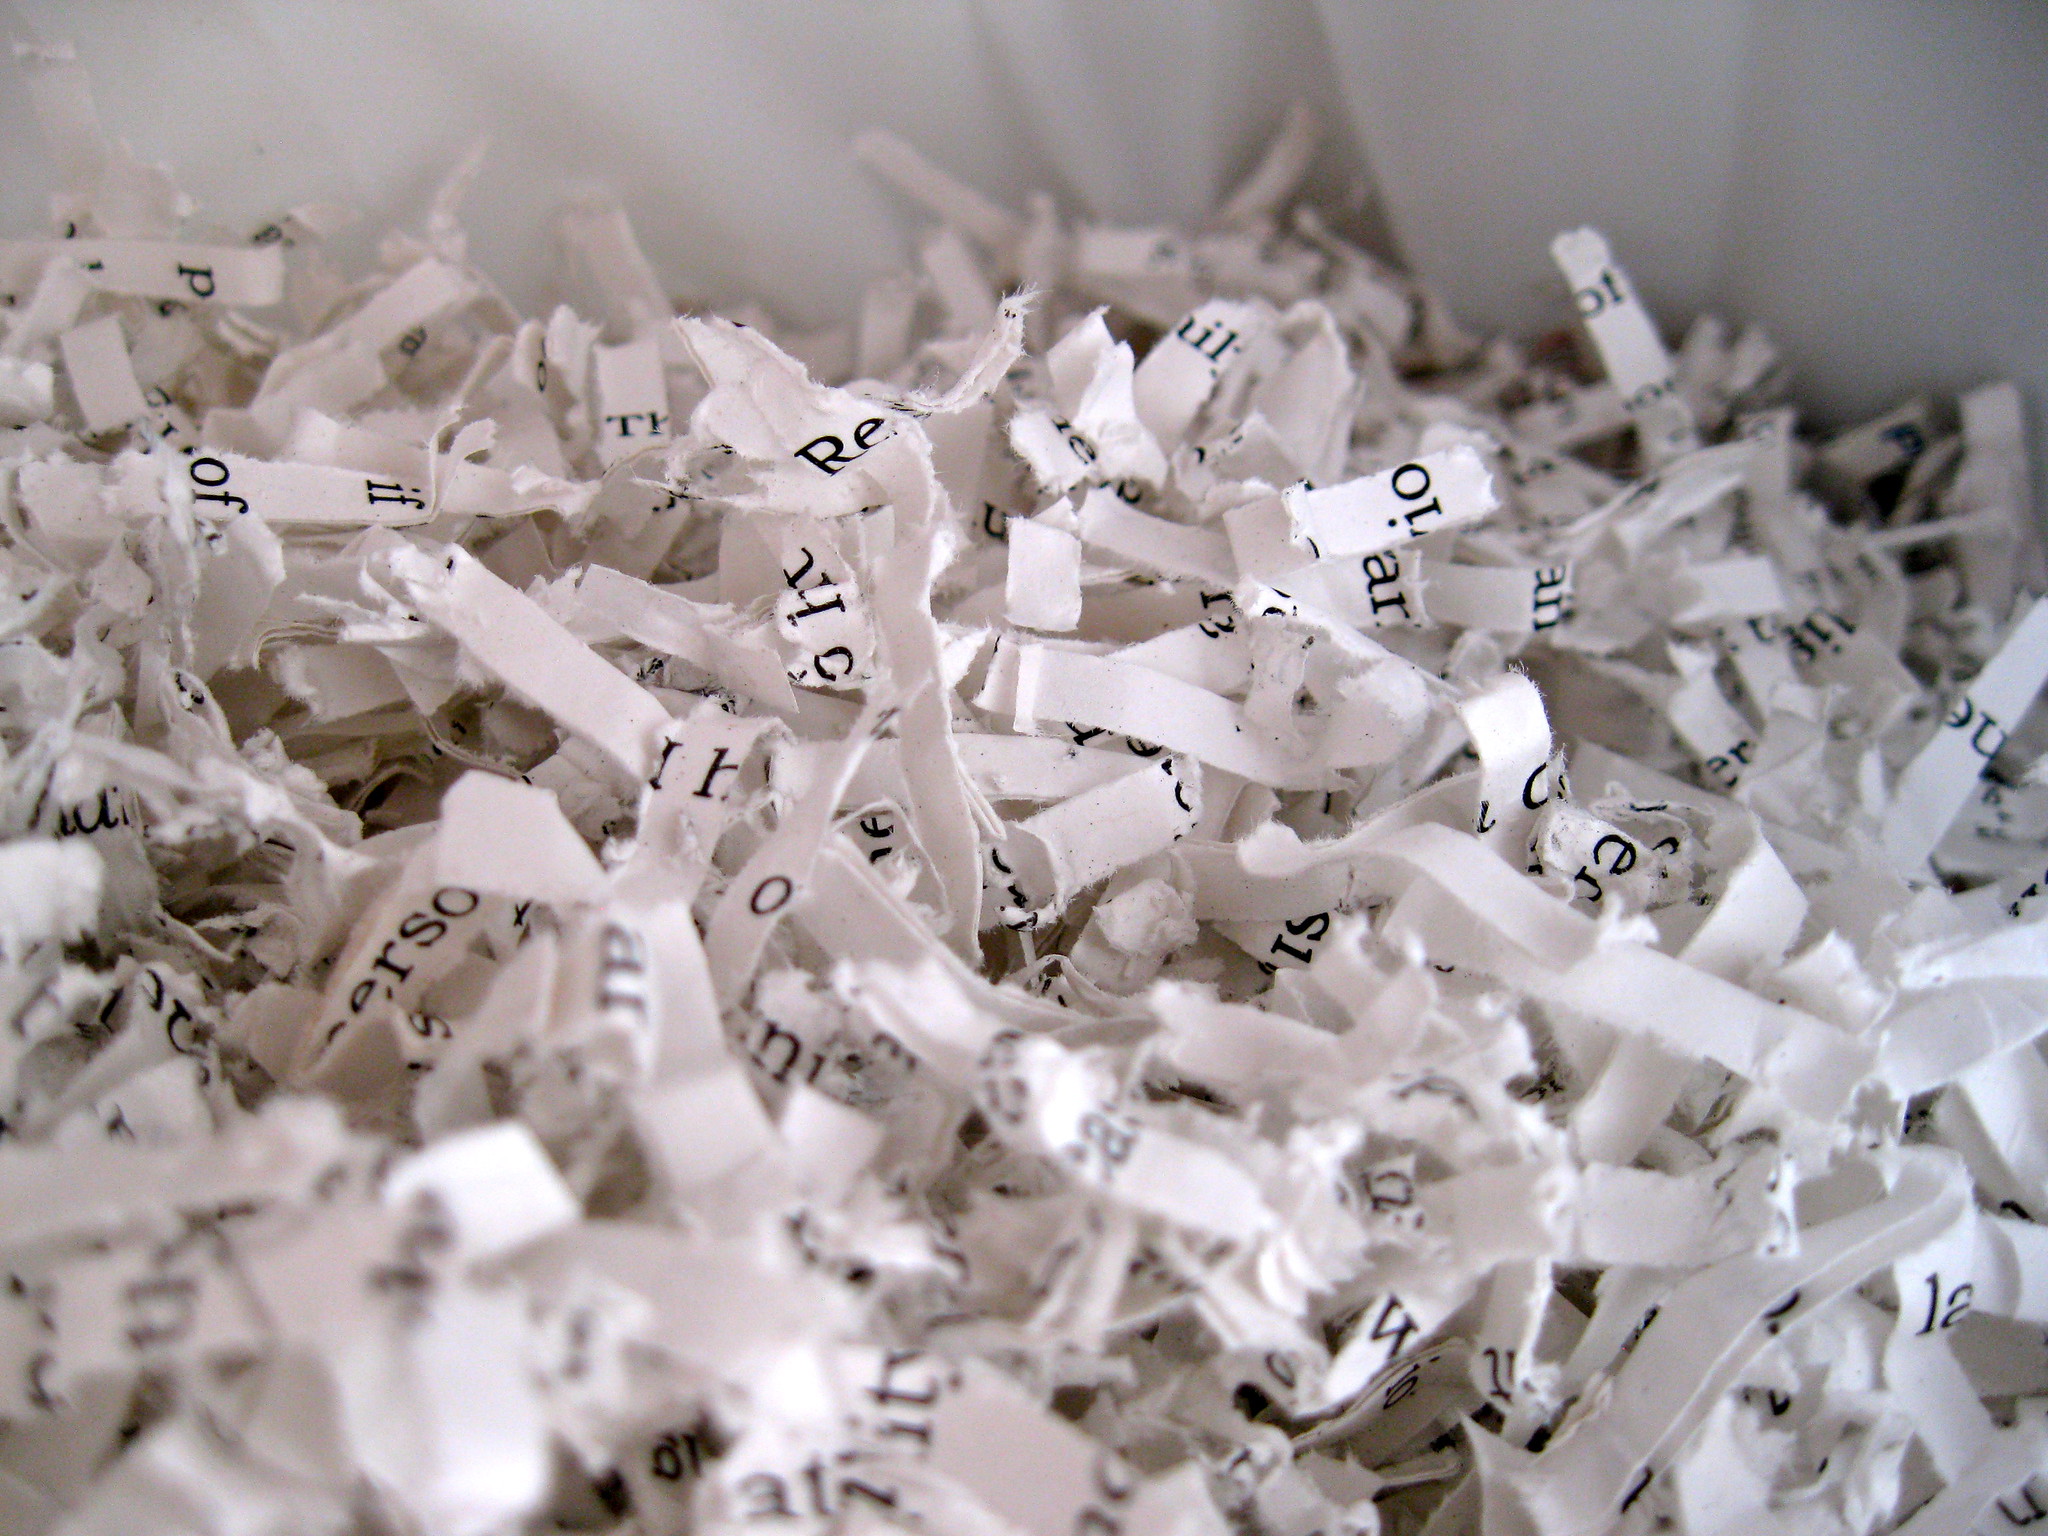 A close up shot of a pile of shredded paper.